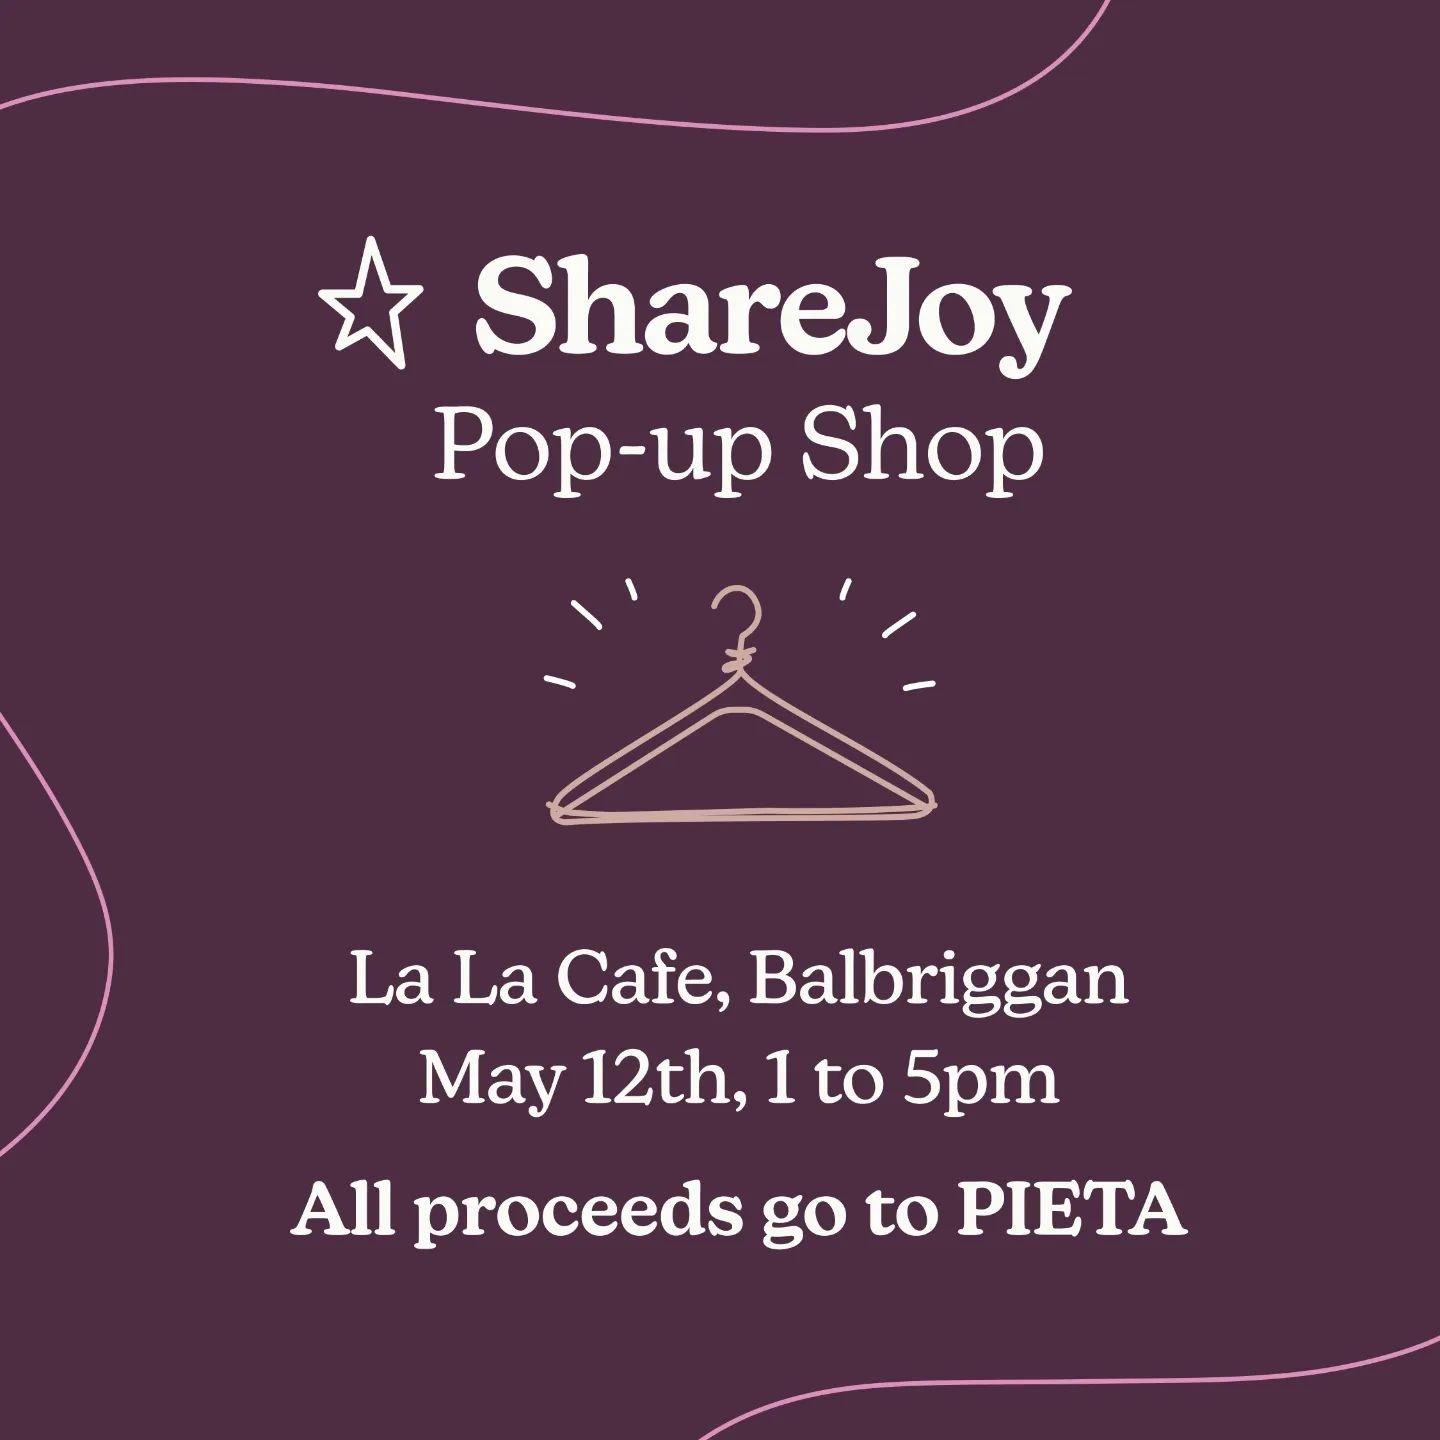 Come along to @thelalabalbriggan on Sunday, May 12th, from 1 pm. for a Sharejoy💜 popup. Update your wardrobe, raise funds for @pieta.house, and shop sustainably in a beautiful setting . We have gorgeous dresses and casual wear that haven't gone up o